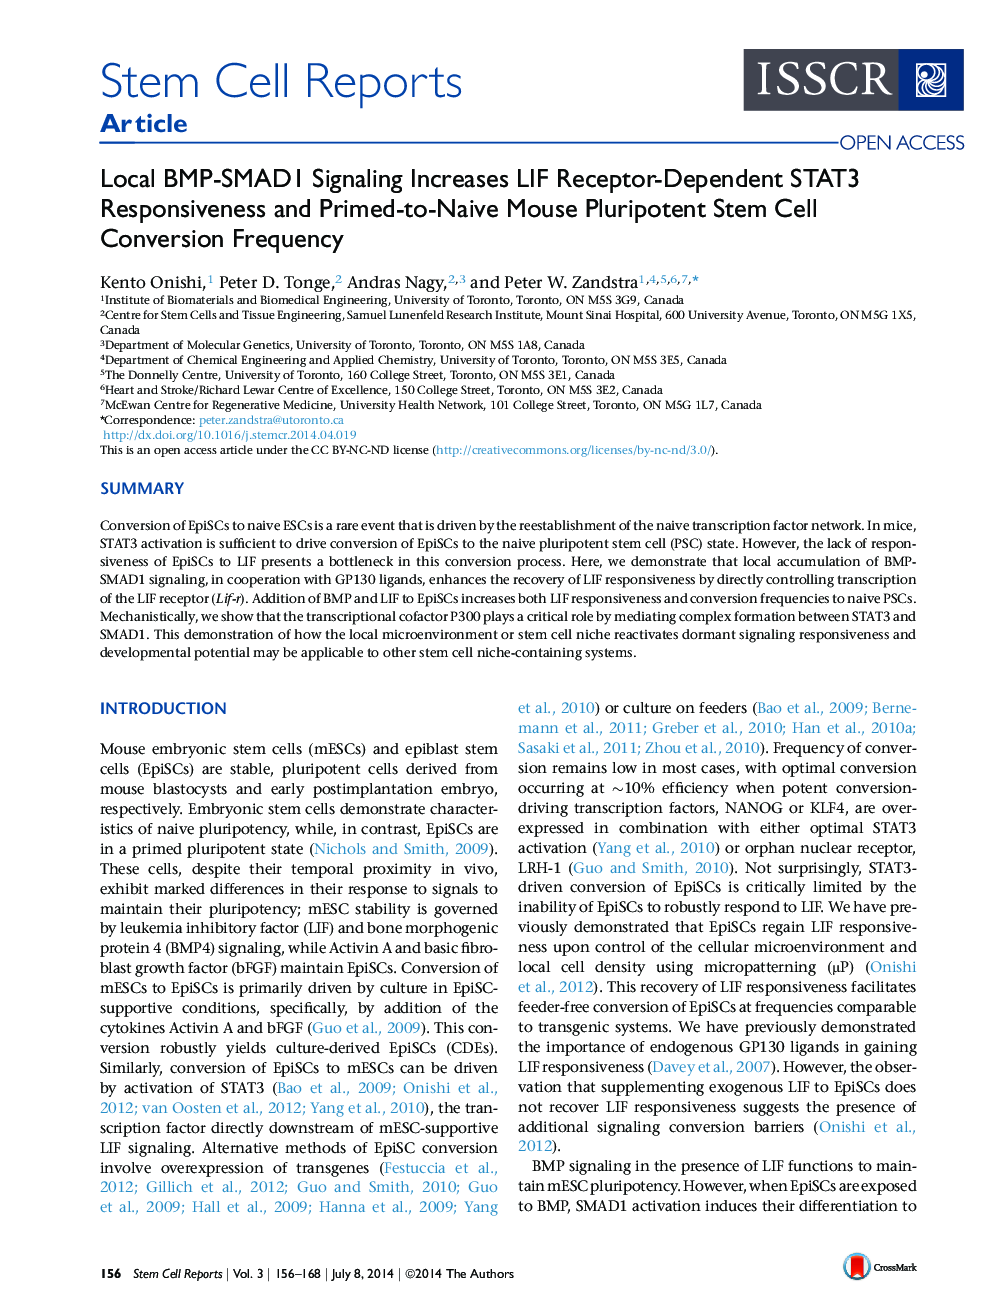 Local BMP-SMAD1 Signaling Increases LIF Receptor-Dependent STAT3 Responsiveness and Primed-to-Naive Mouse Pluripotent Stem Cell Conversion Frequency 